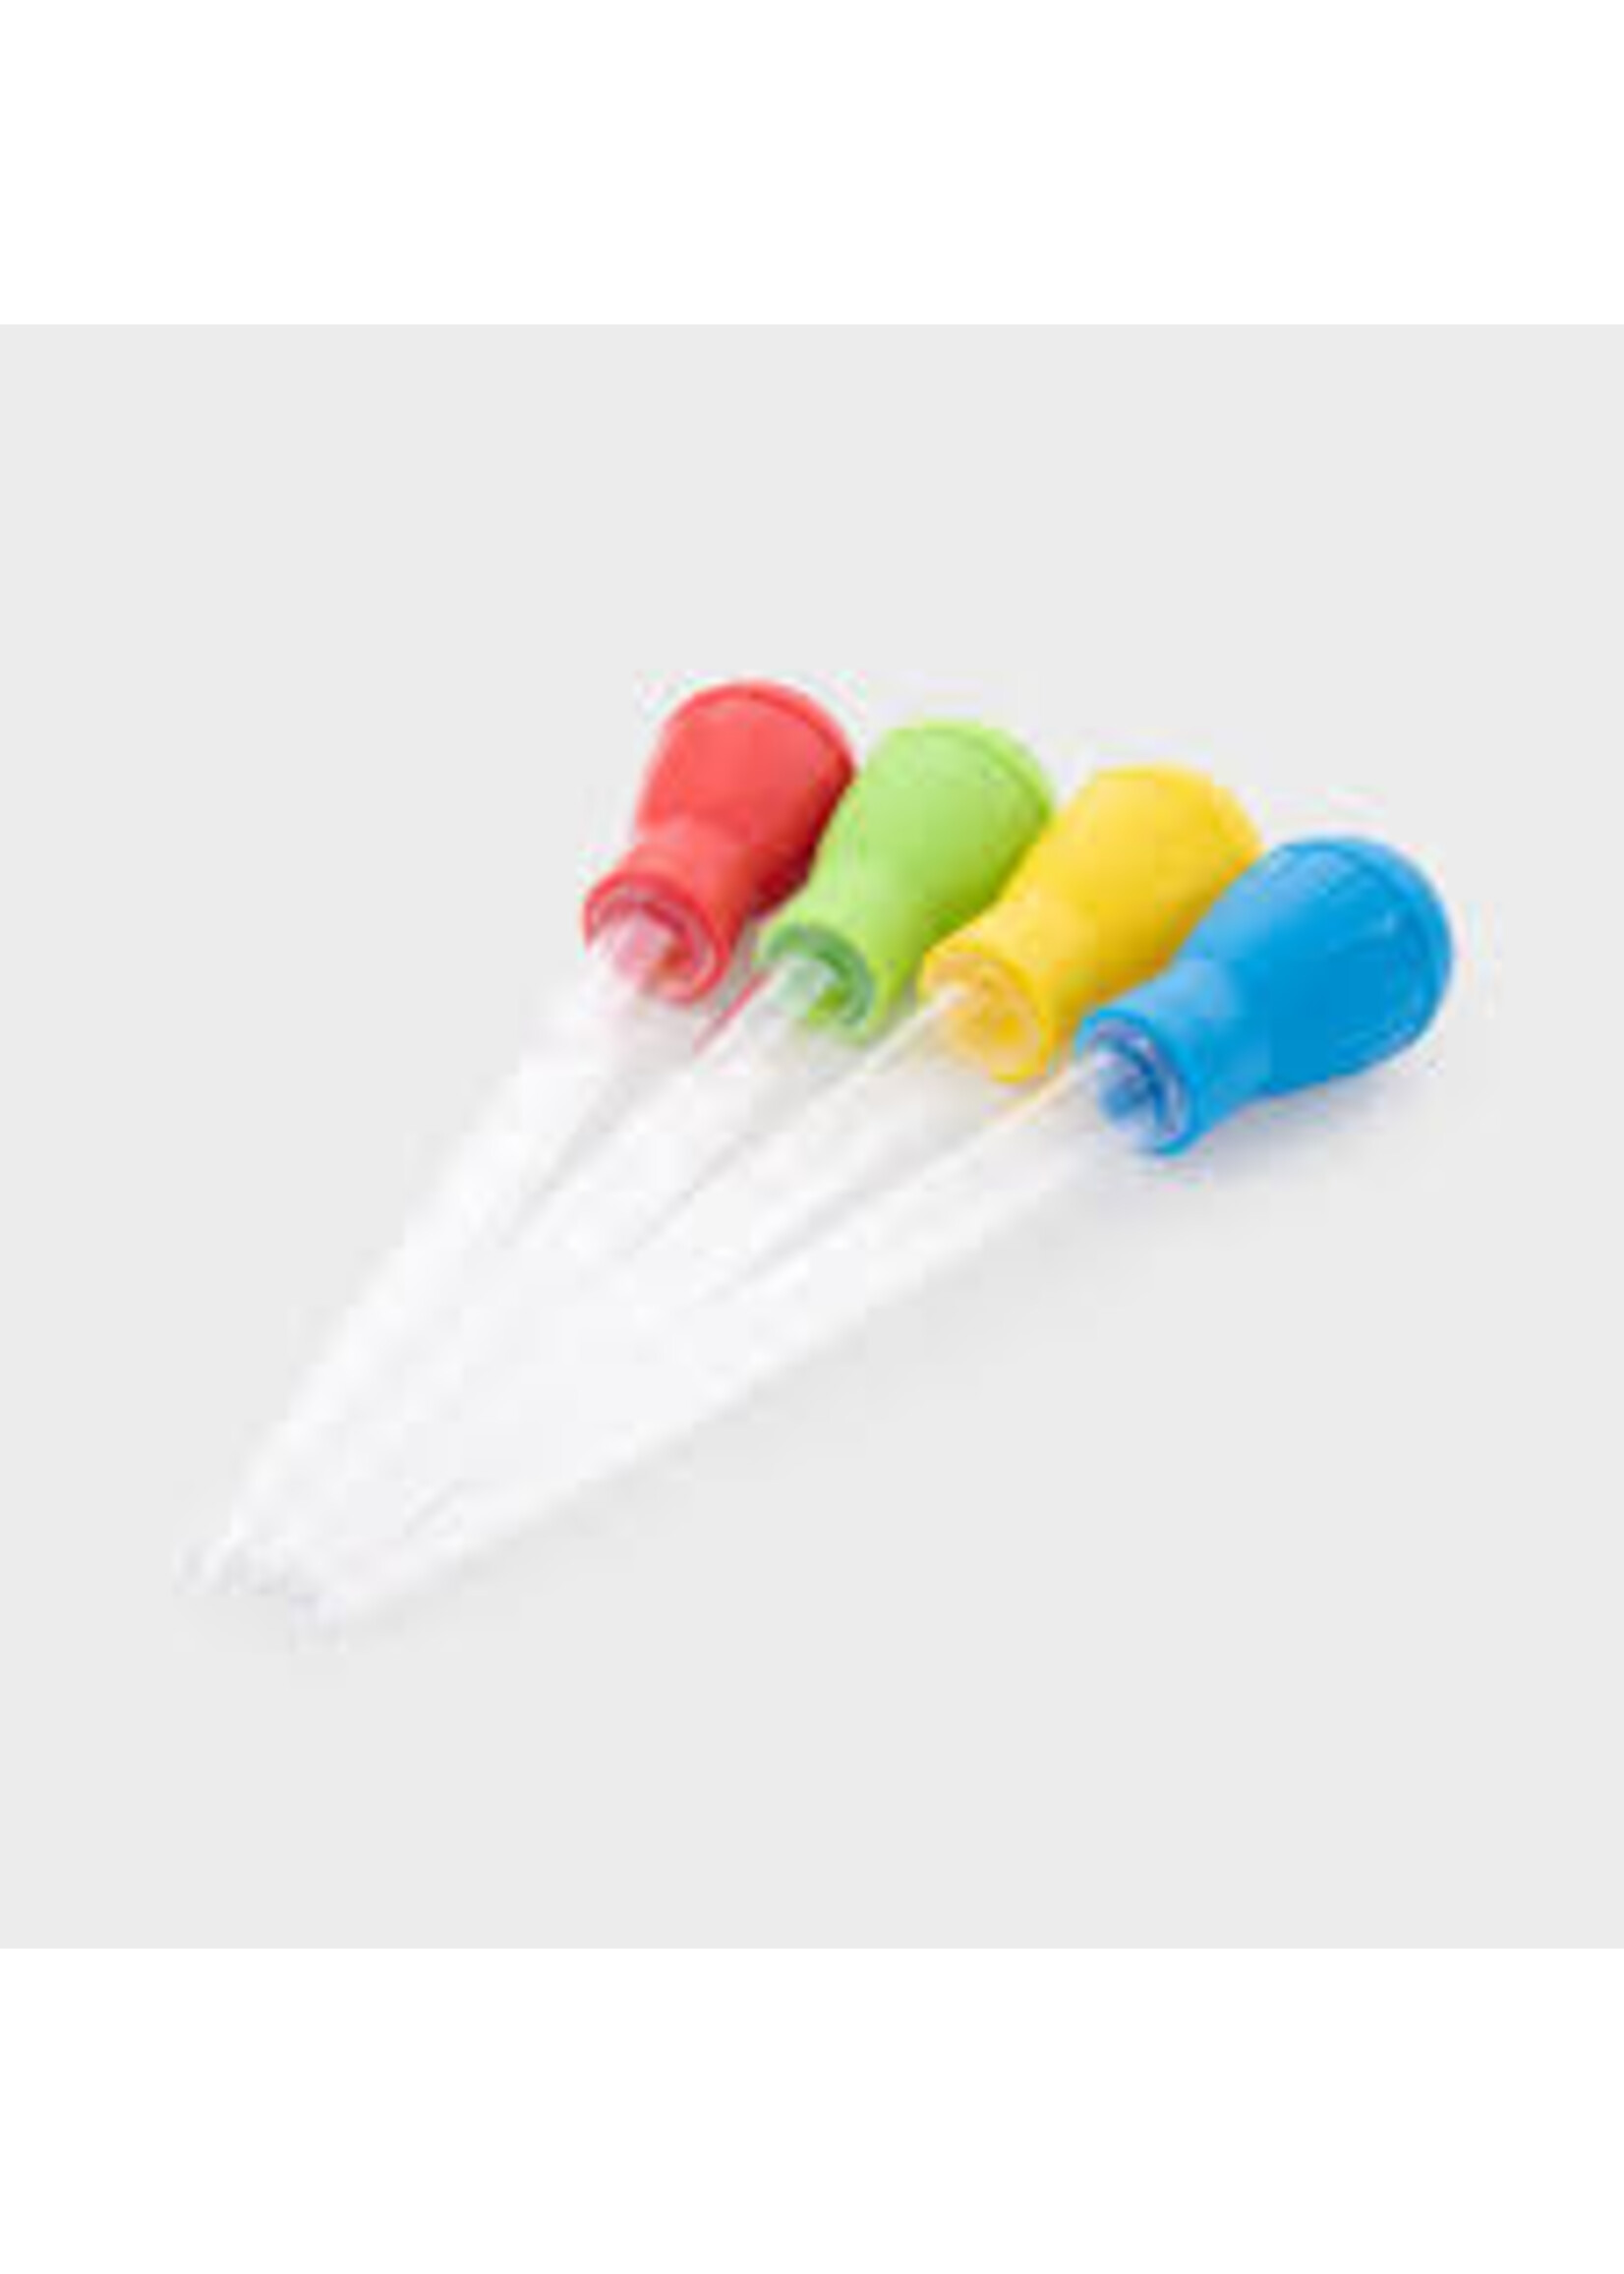 TickiT Measuring pipettes 30ml (4)